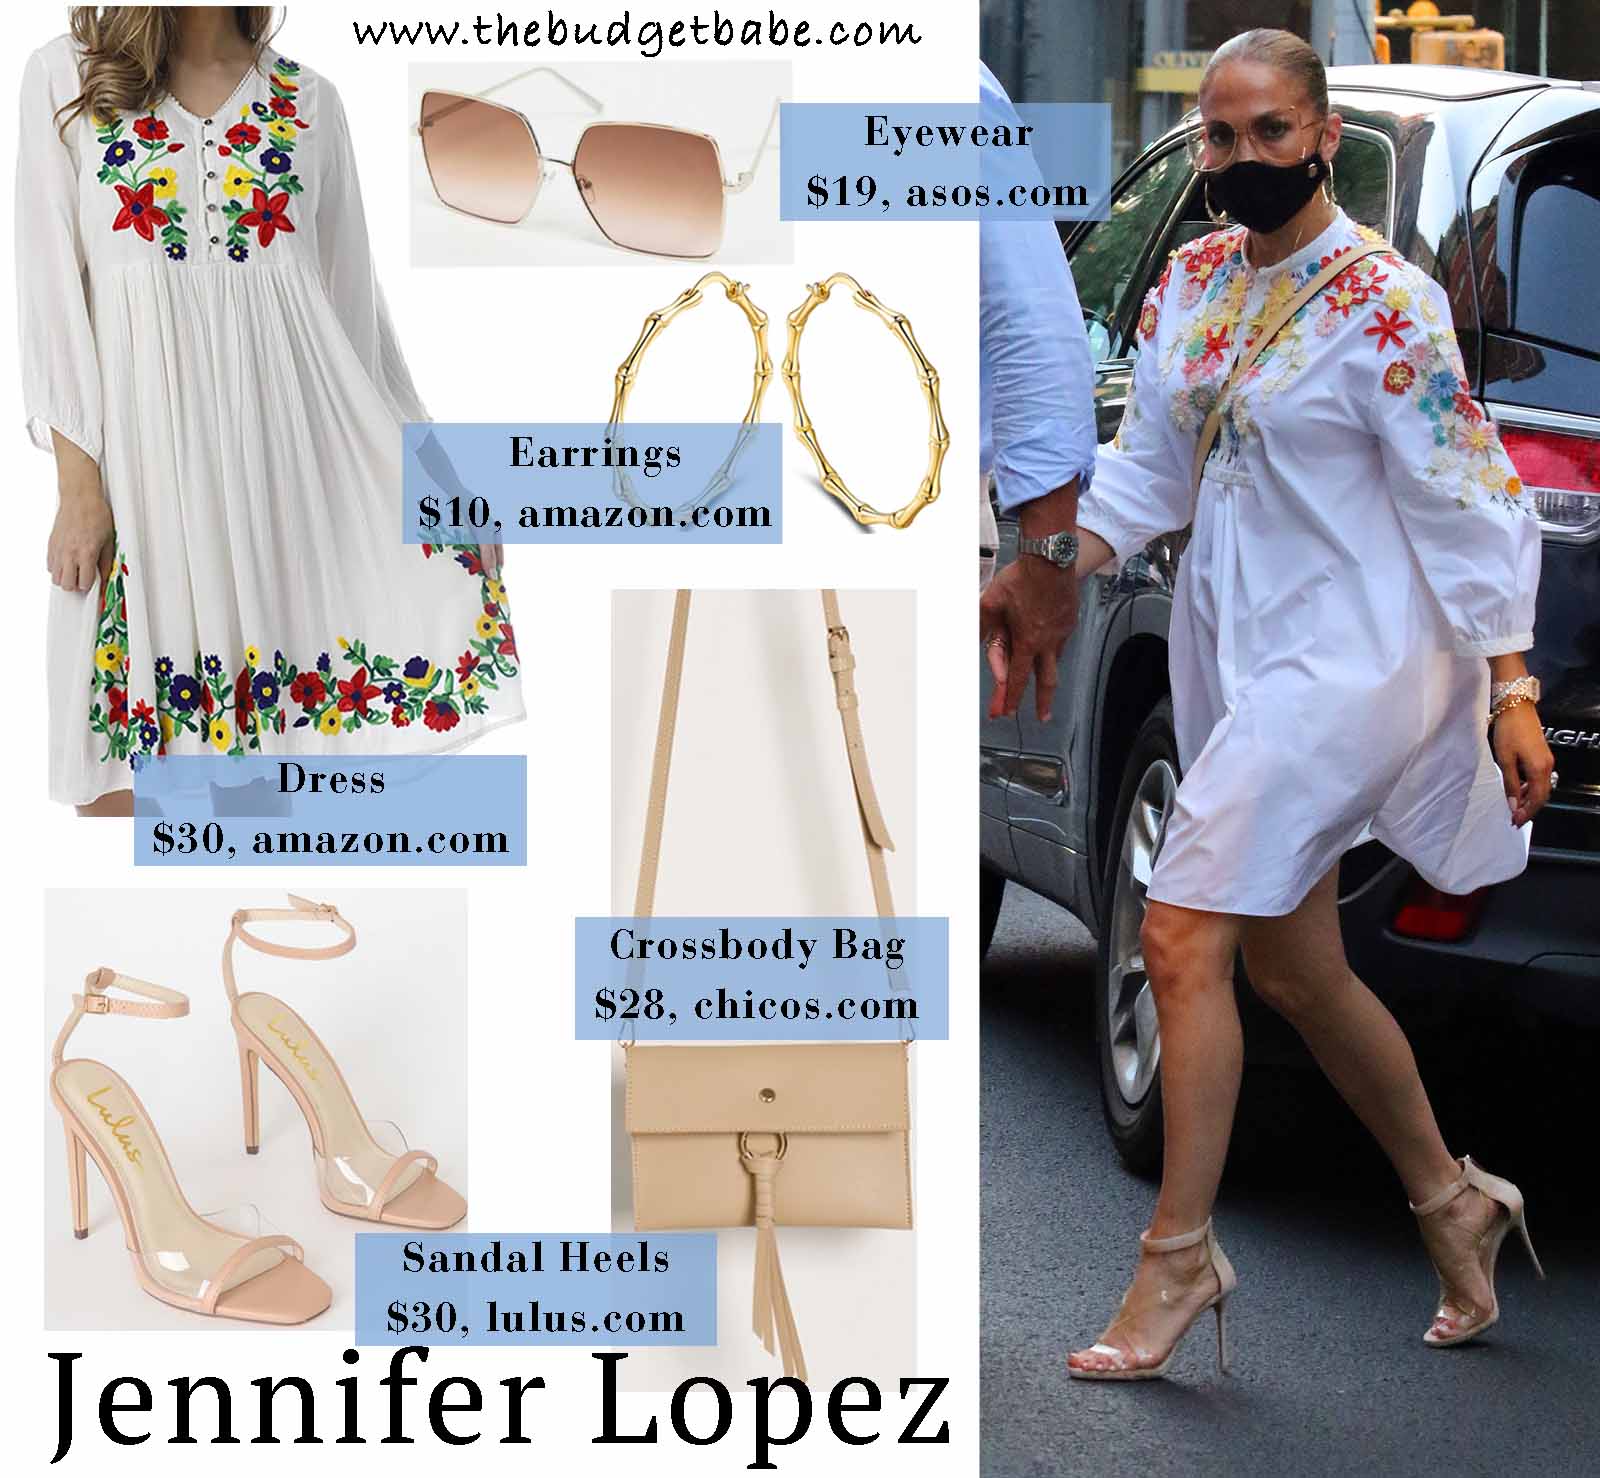 Jlo styles a Valentino dress perfectly!